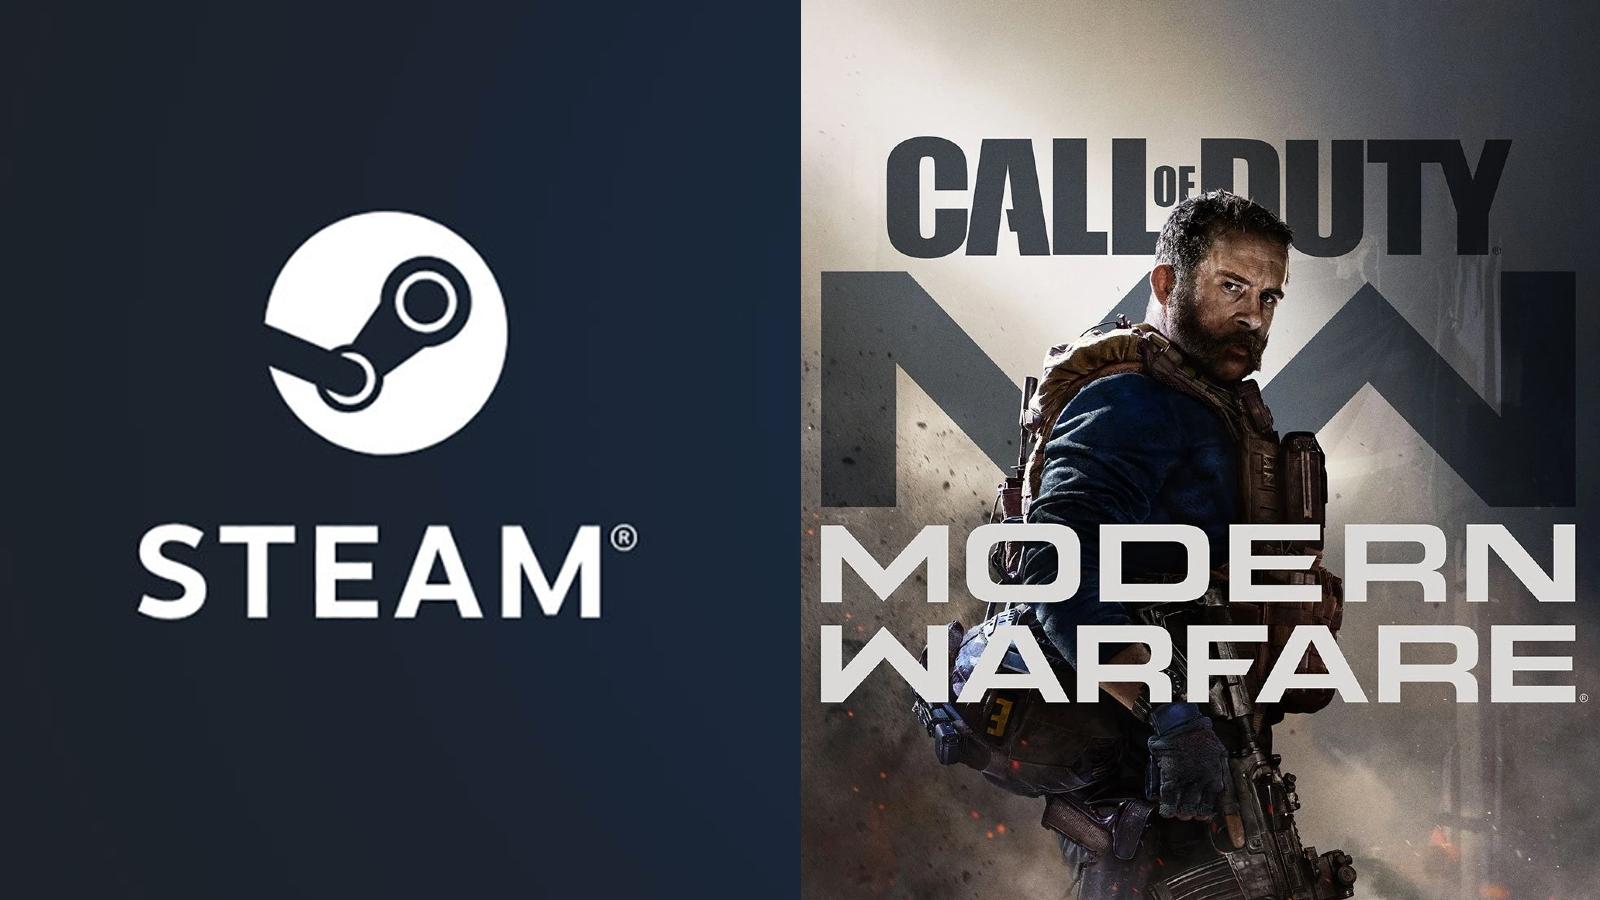 Call of Duty looks like it's coming back to Steam with Modern